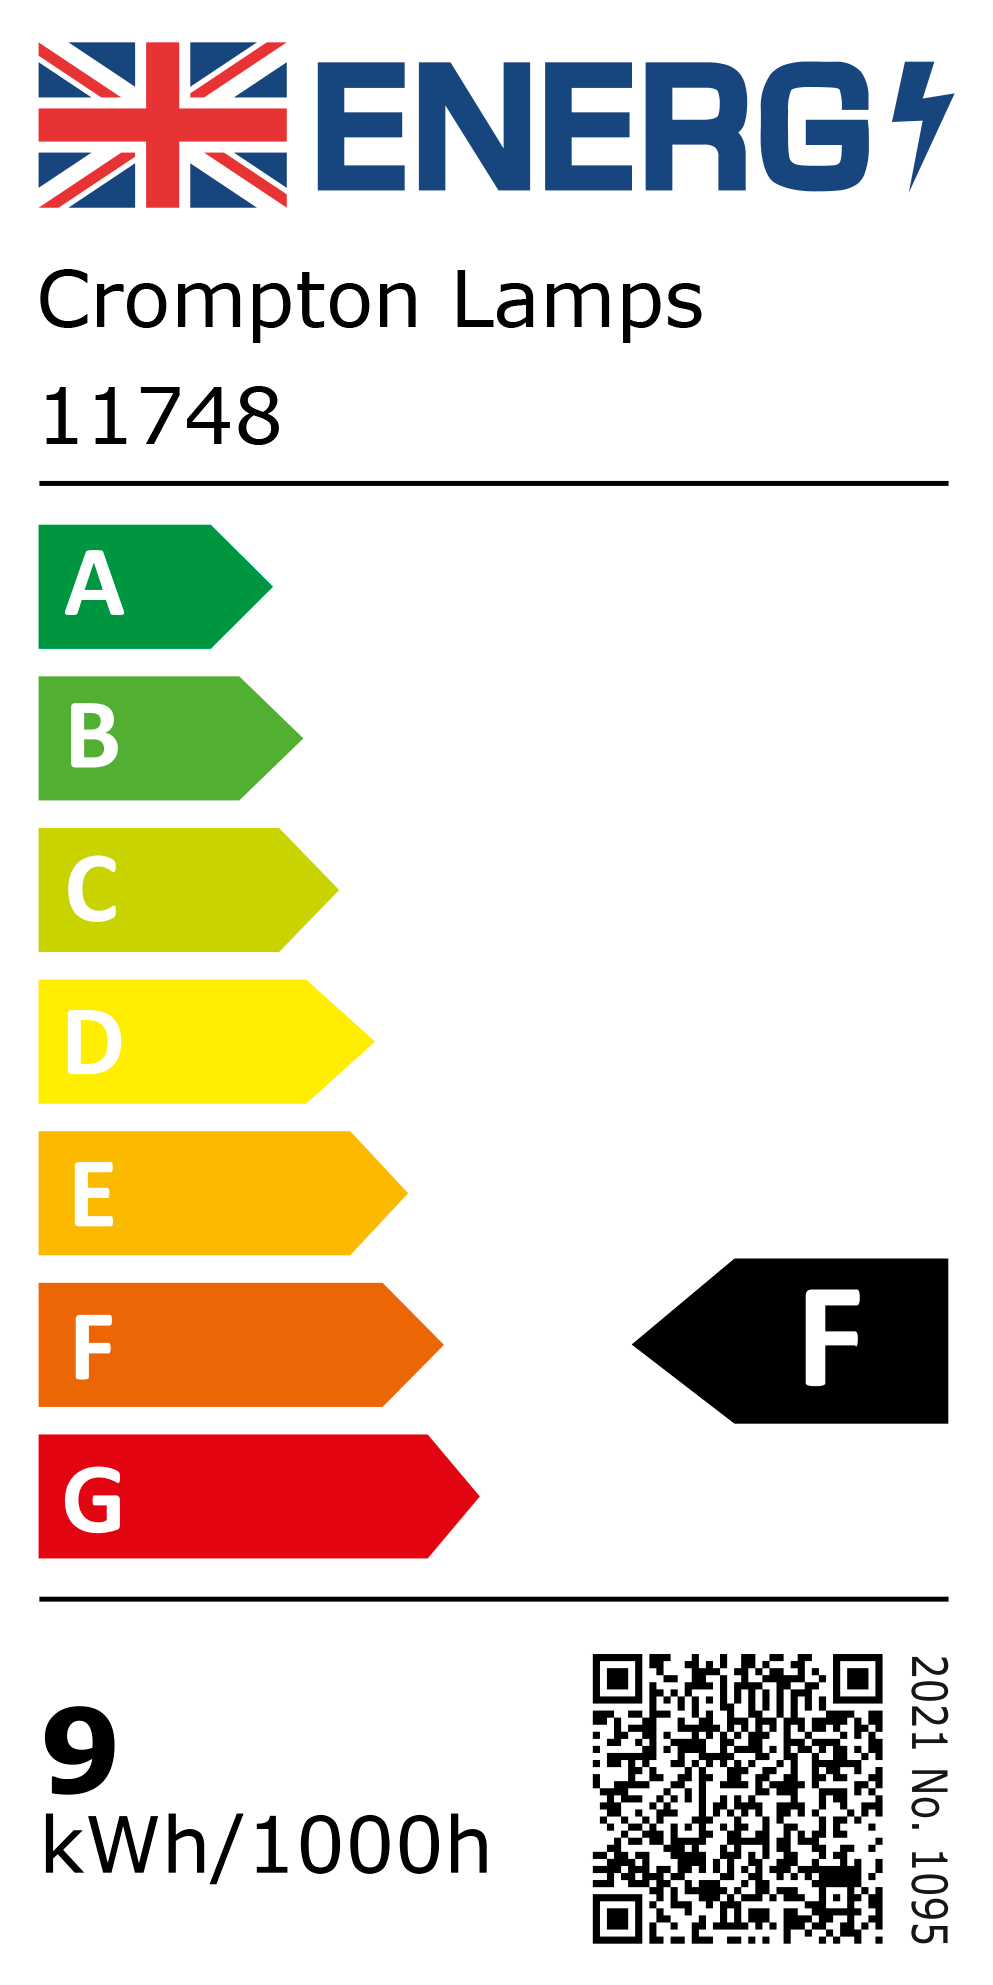 New 2021 Energy Rating Label: Stock Code 11748